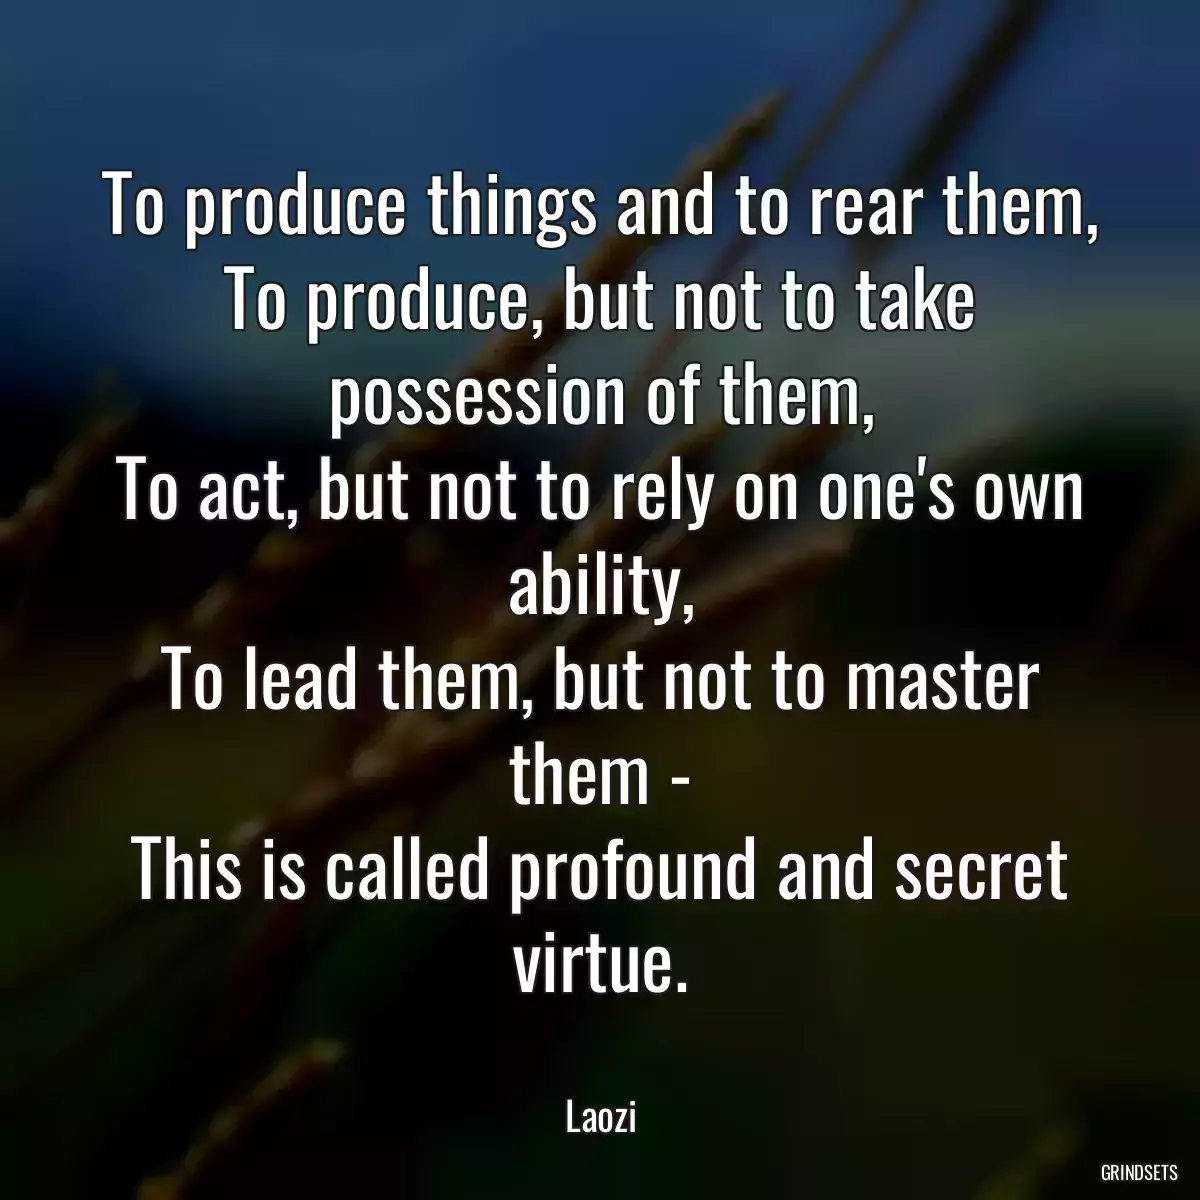 To produce things and to rear them,
To produce, but not to take possession of them,
To act, but not to rely on one\'s own ability,
To lead them, but not to master them -
This is called profound and secret virtue.